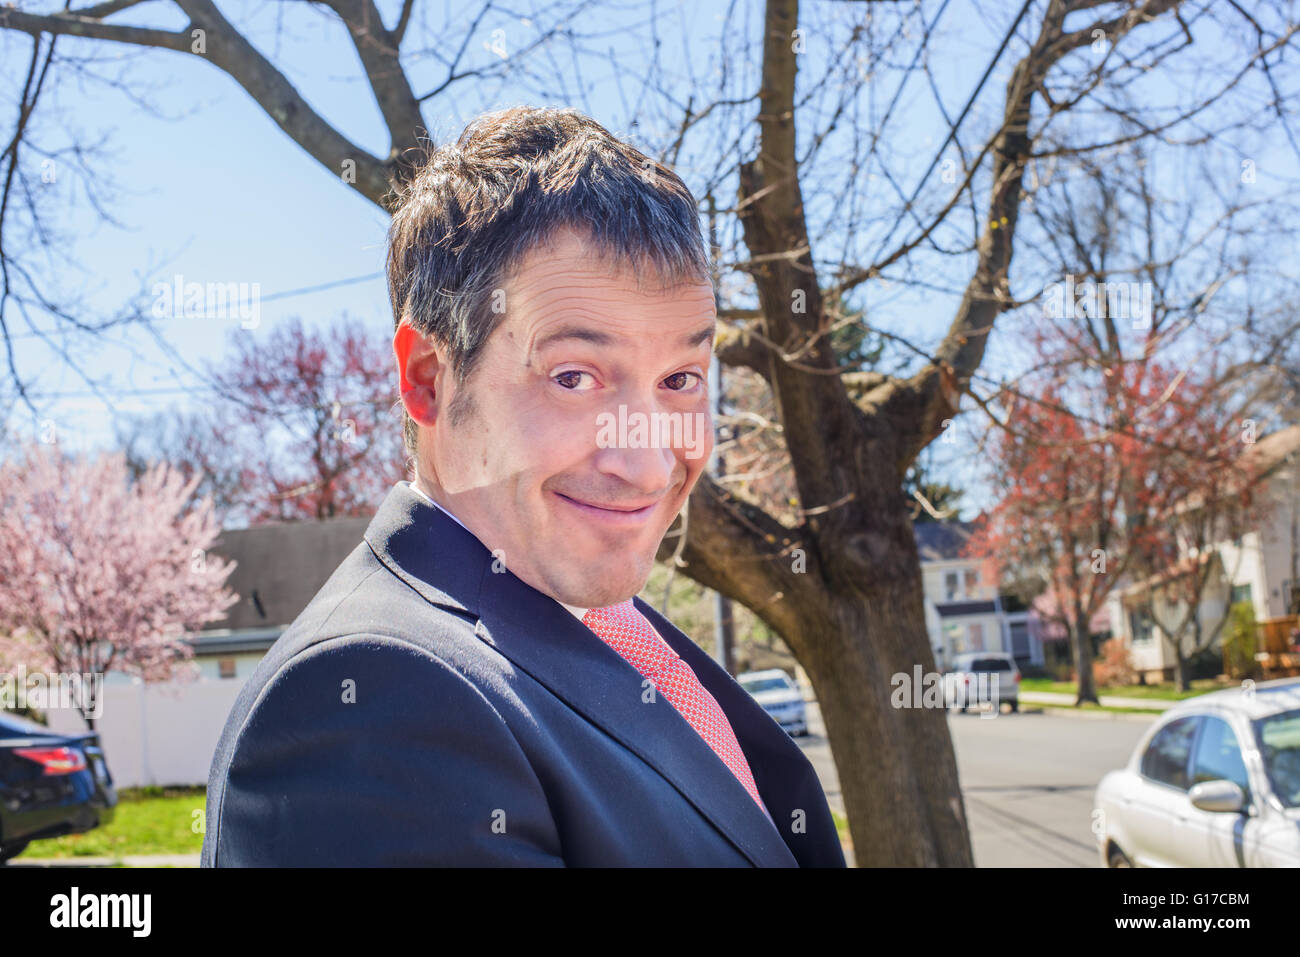 Portrait of business man in residential area pulling face at camera smiling Stock Photo